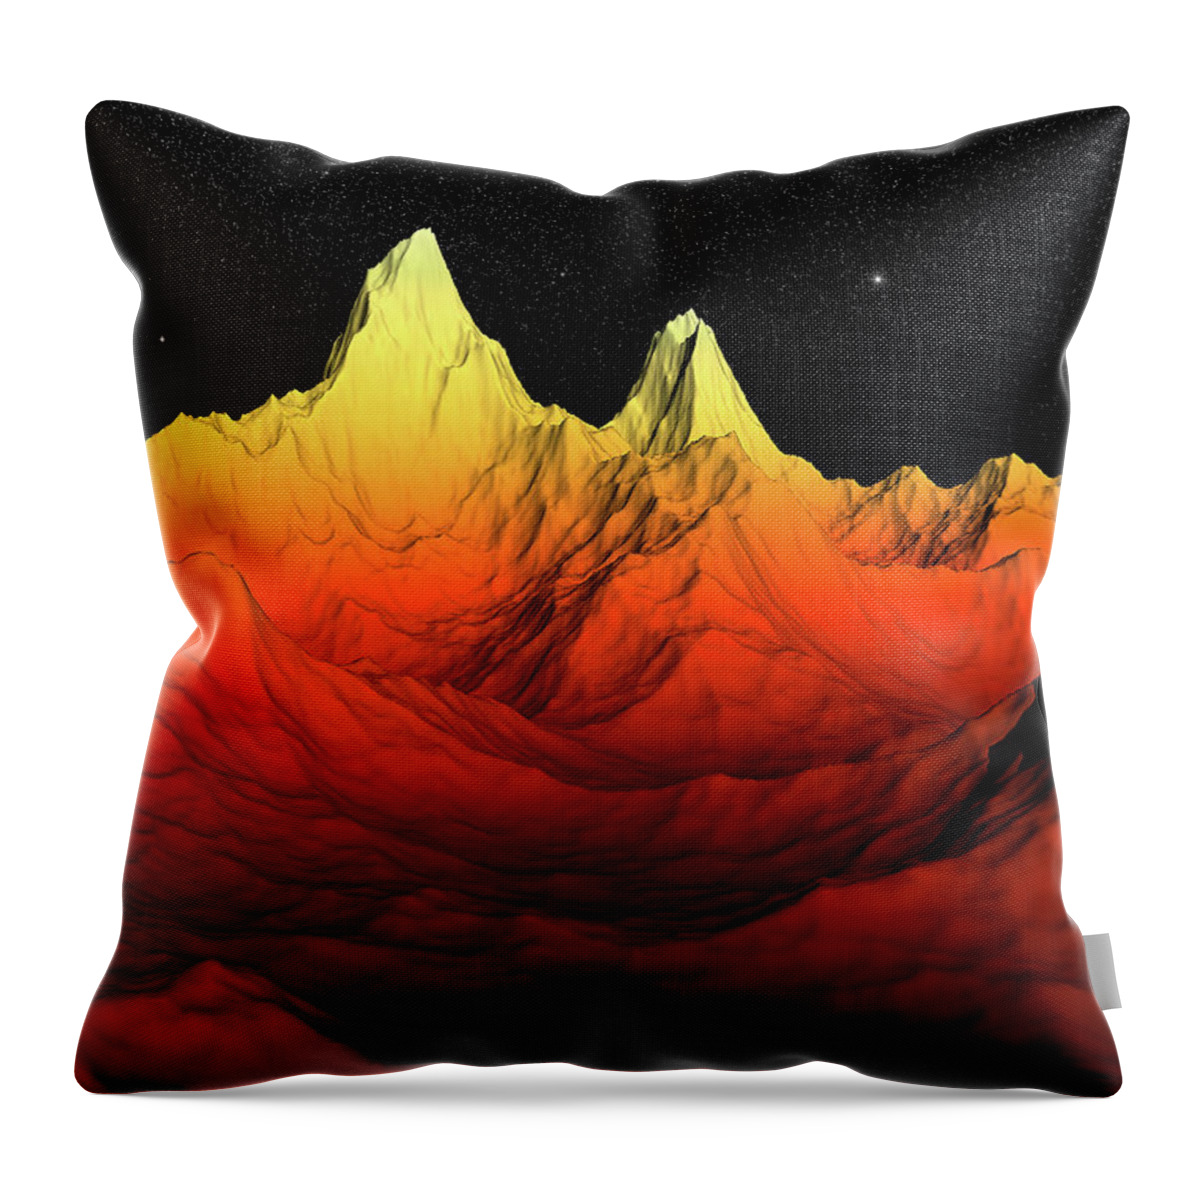 Sci Fi Throw Pillow featuring the digital art Sci Fi Mountains Landscape by Phil Perkins